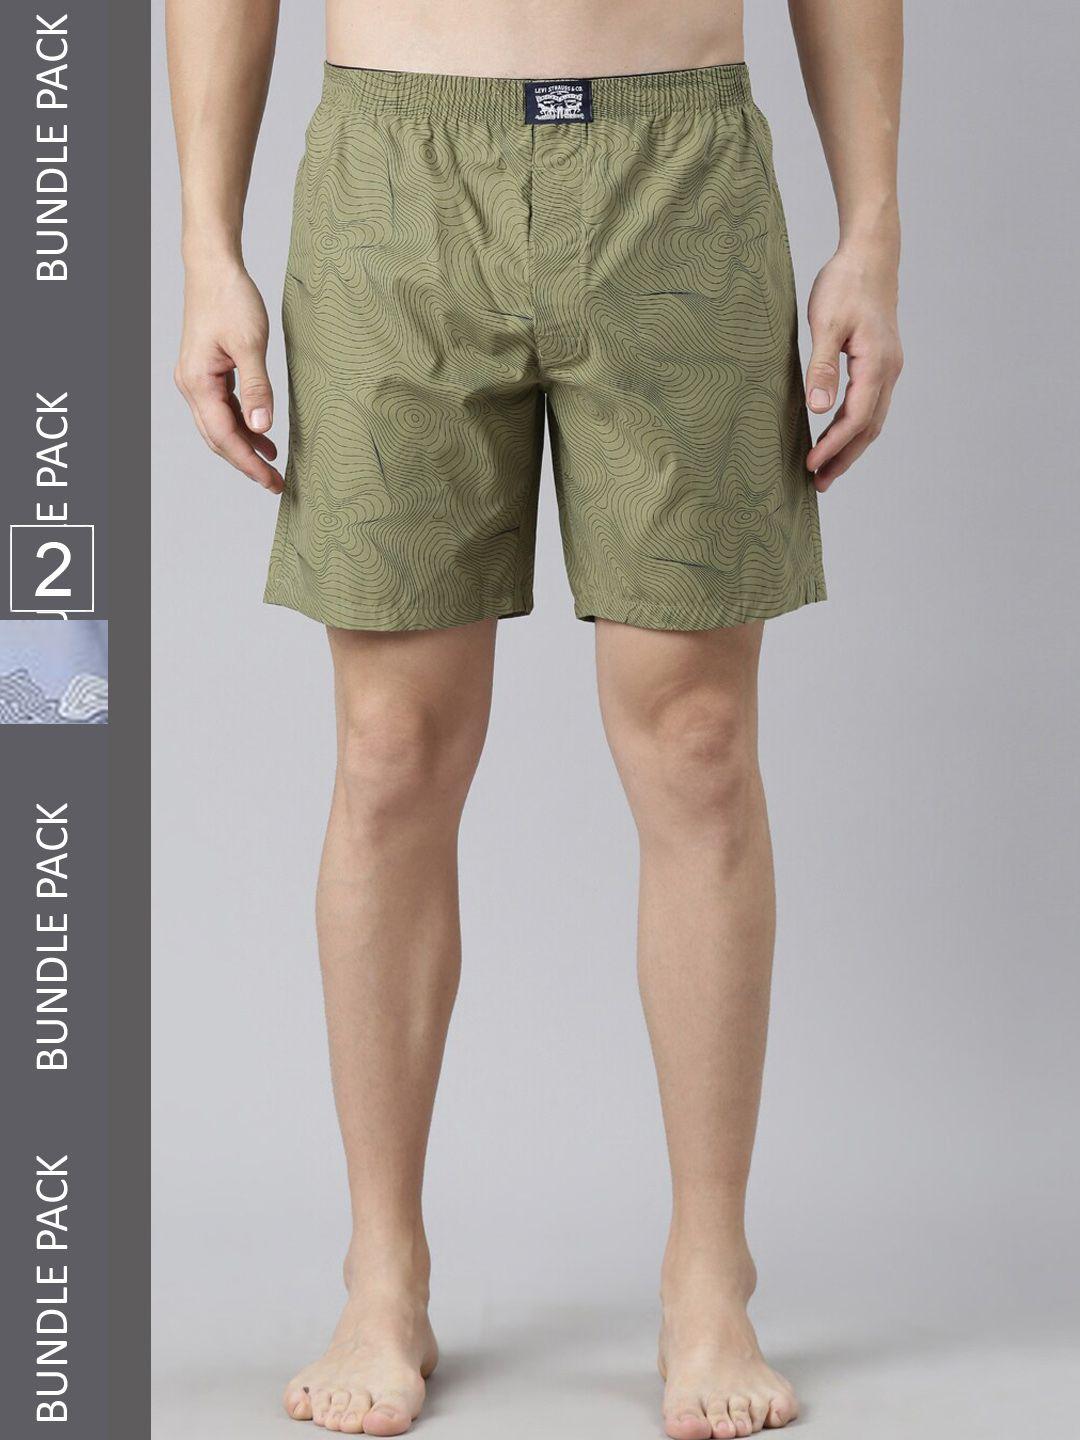 levis-men-pack-of-2-printed-woven-cotton-boxer-shorts-with-smartskin-technology-#023